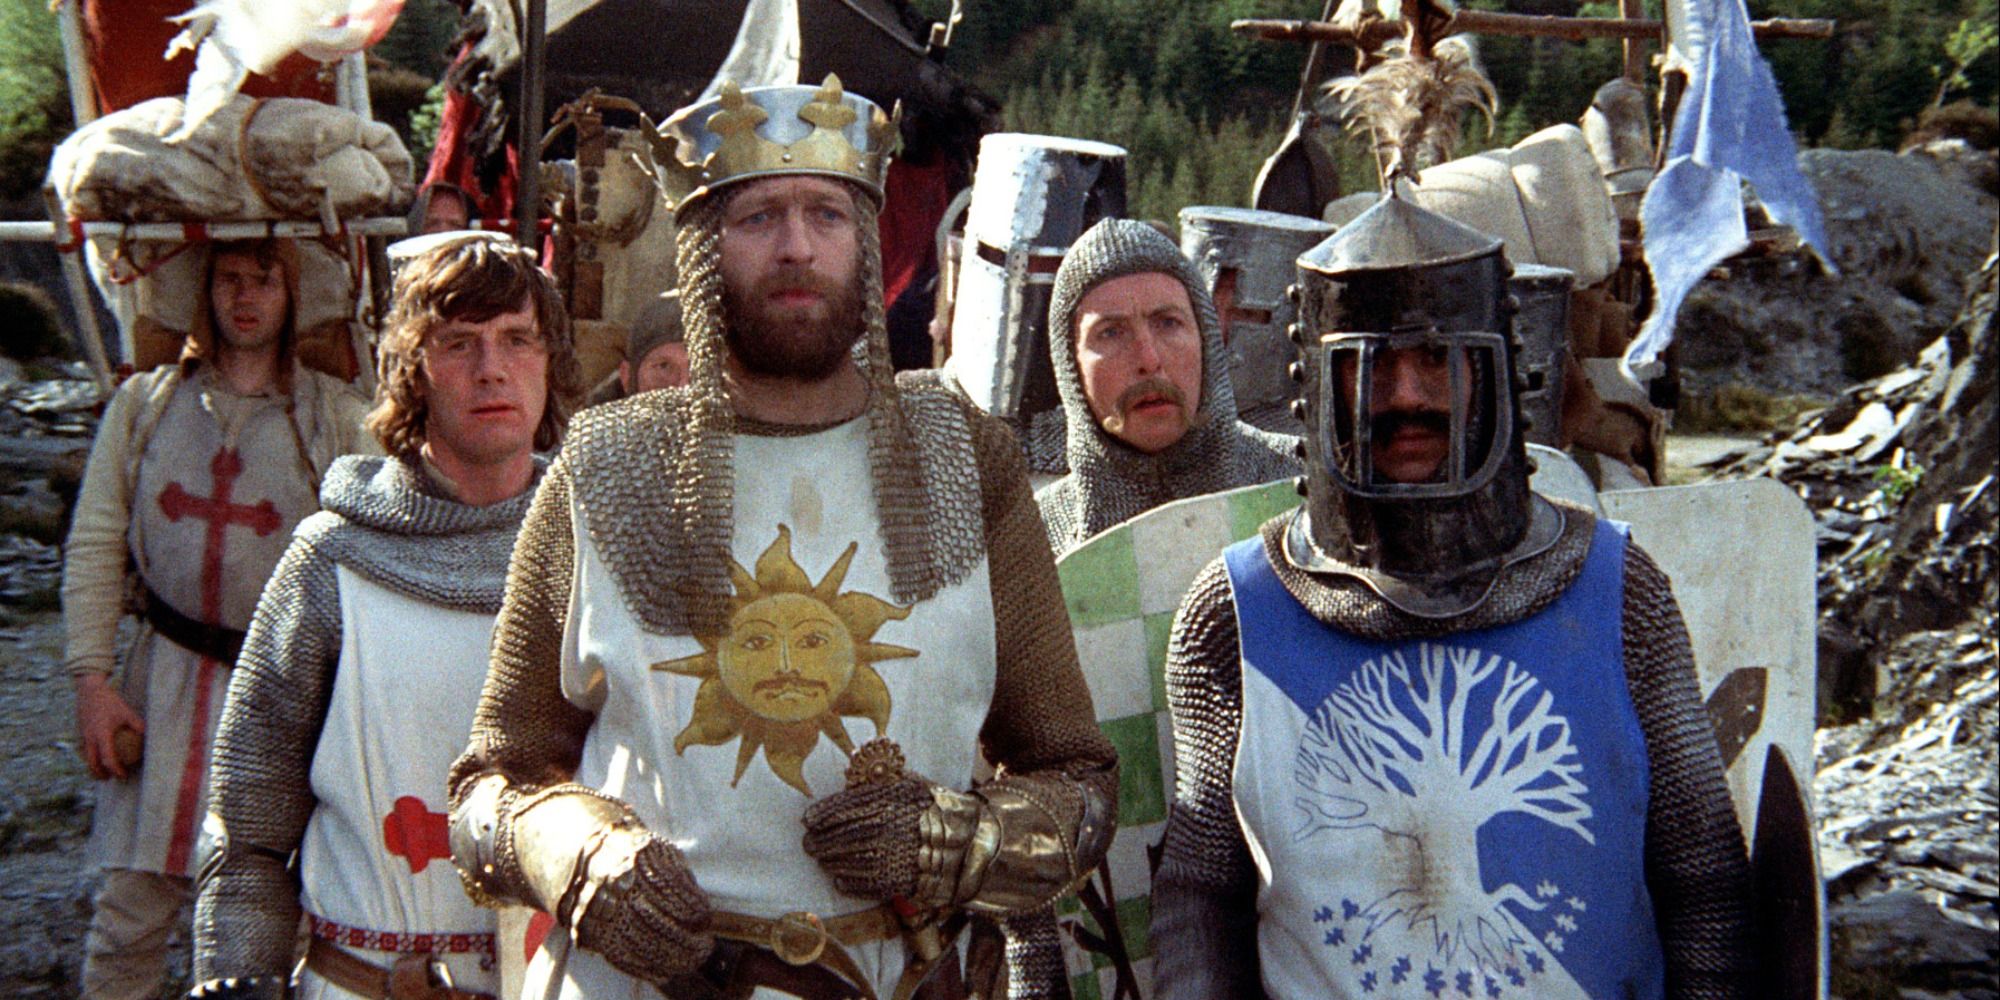 A bunch of knights from Monty Python and the Holy Grail